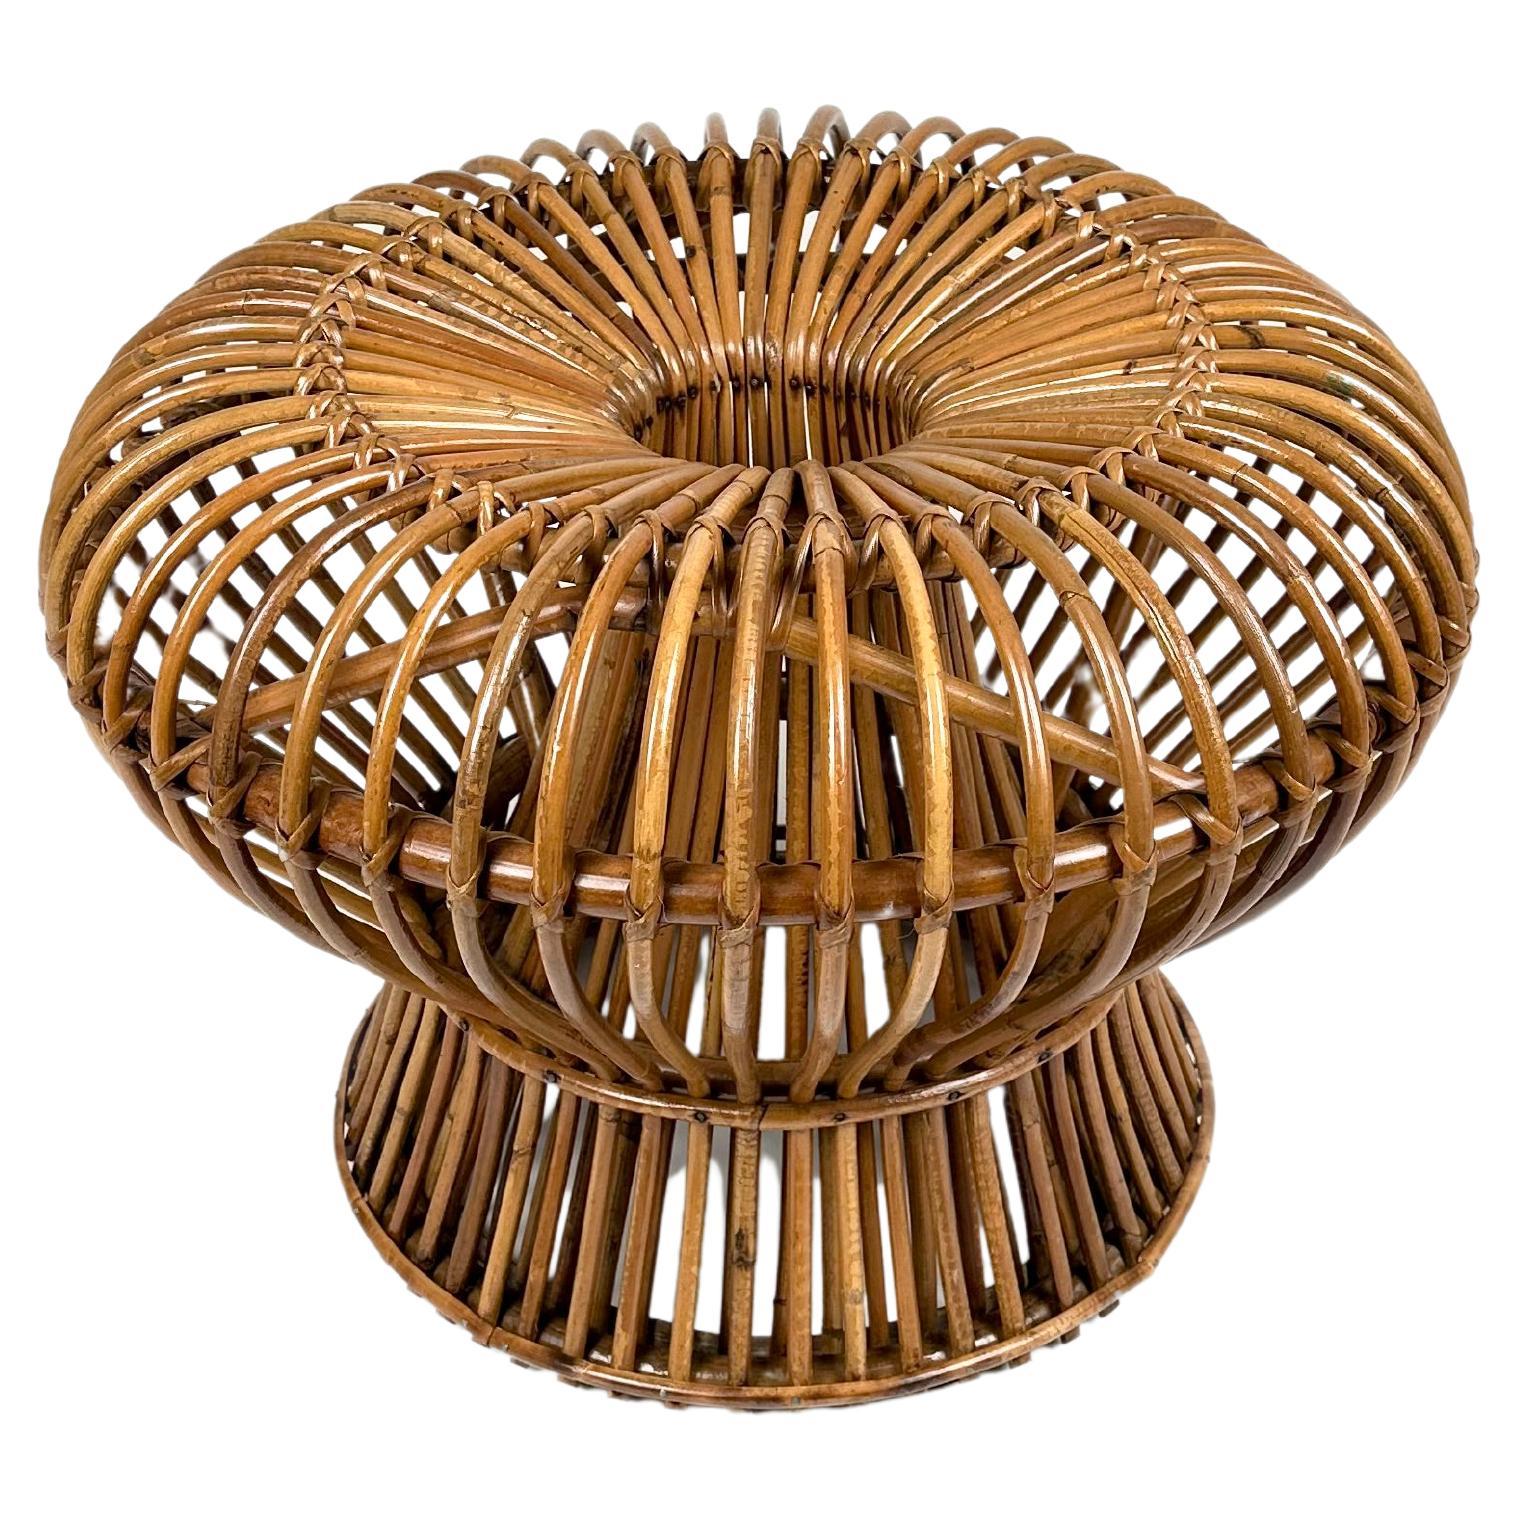 Midcentury Ottoman Stool in Bamboo and Rattan Franco Albini Style, Italy, 1960s